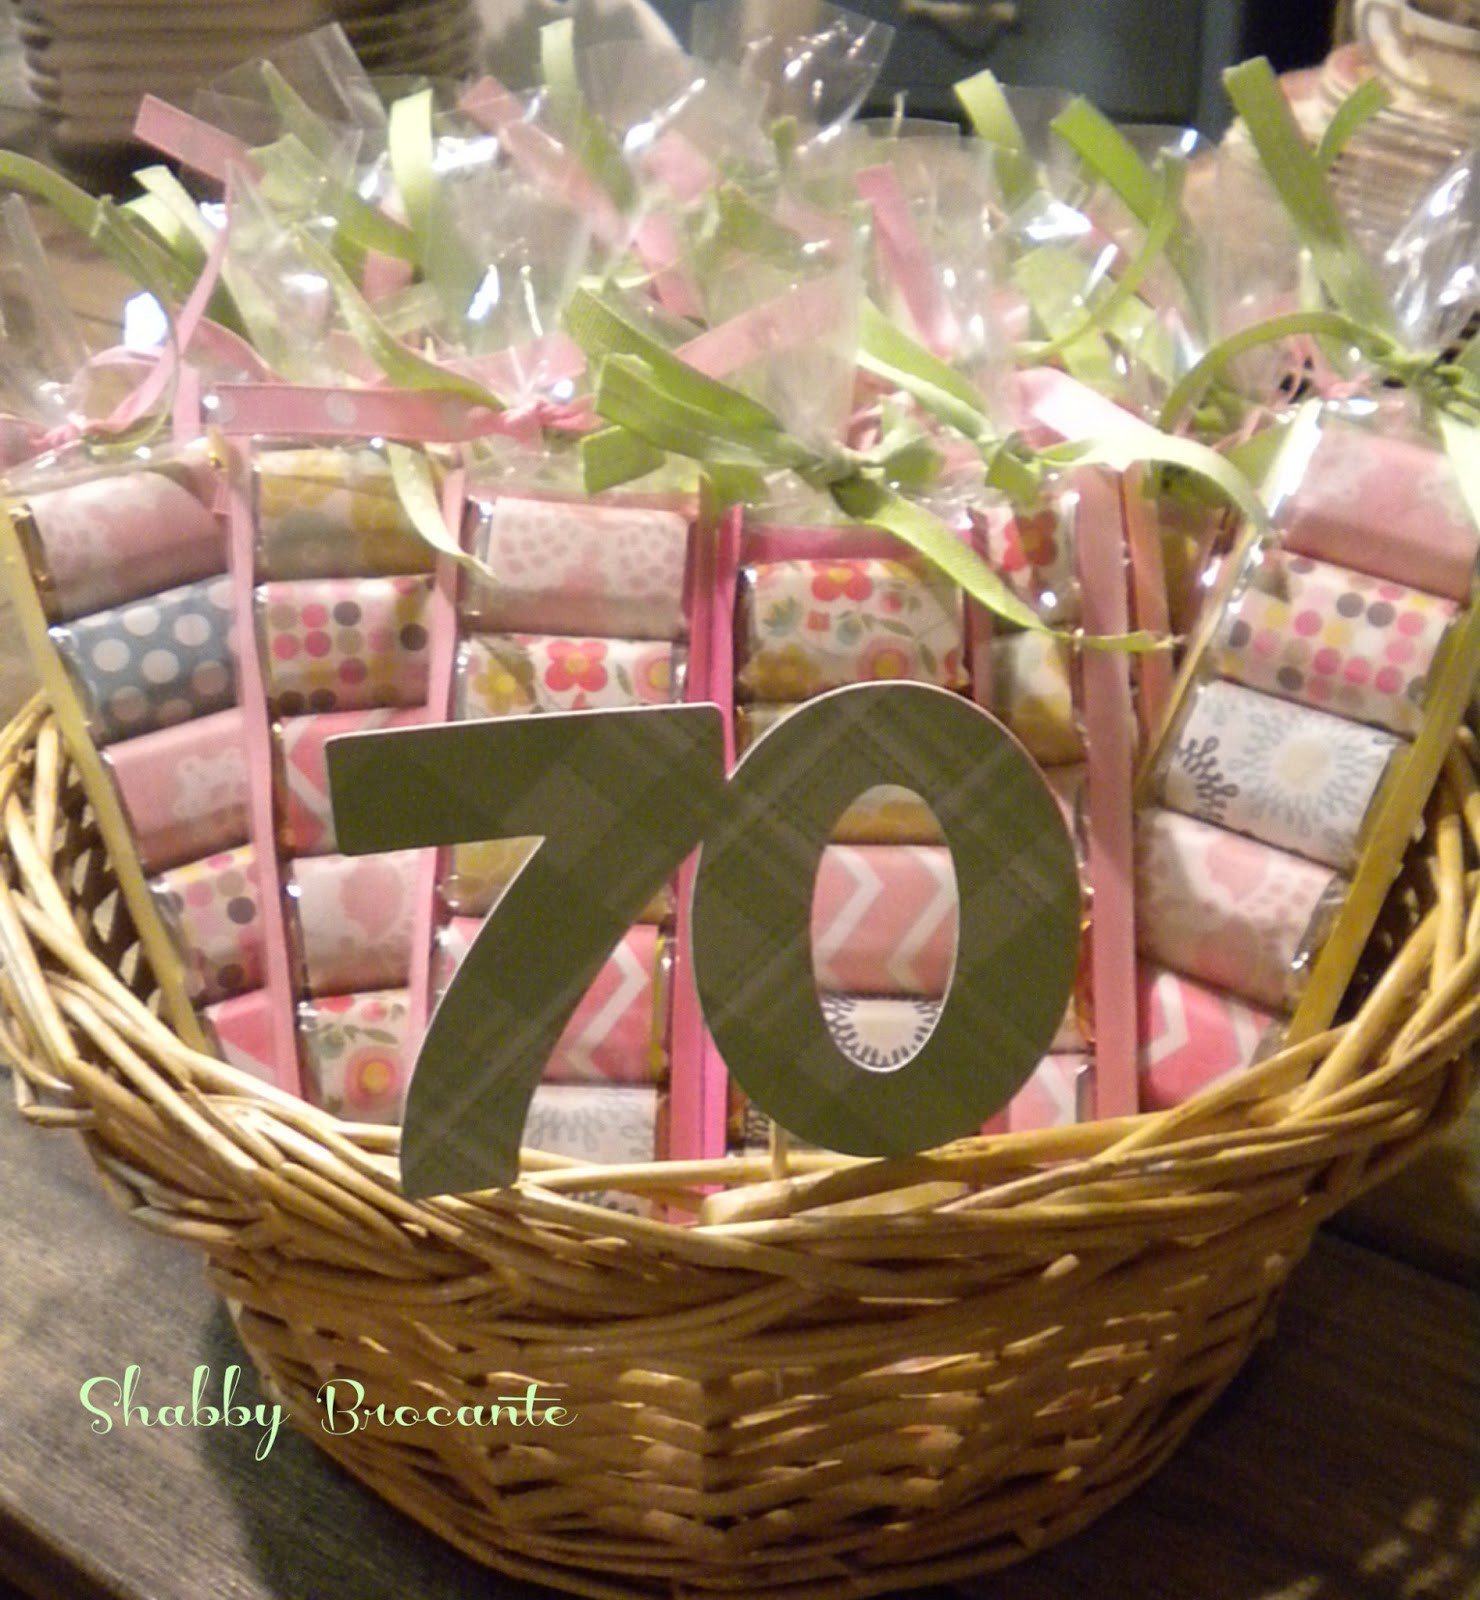 Adult Birthday Party Favors
 Shabby Brocante Hersey s Adult Party Favors